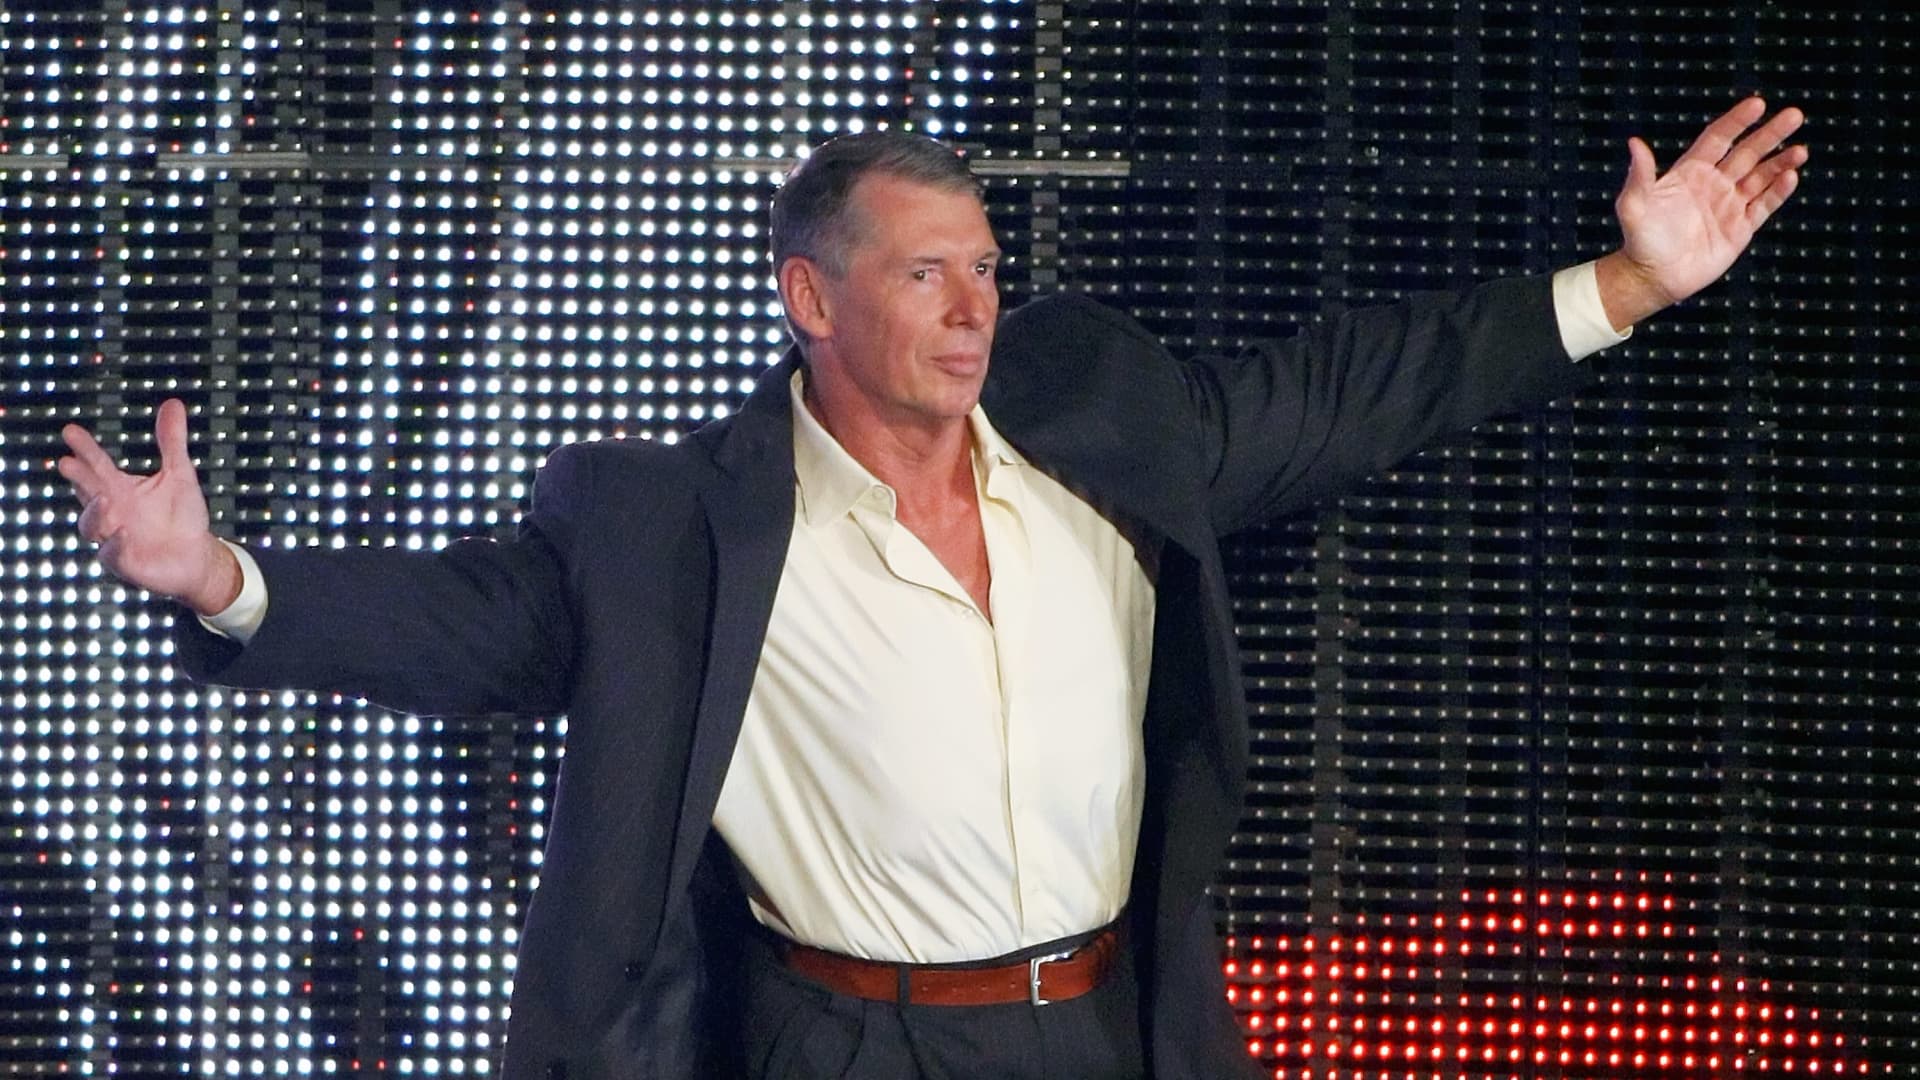 World Wrestling Entertainment Inc. Chairman Vince McMahon is introduced during the WWE Monday Night Raw show at the Thomas & Mack Center August 24, 2009 in Las Vegas, Nevada.